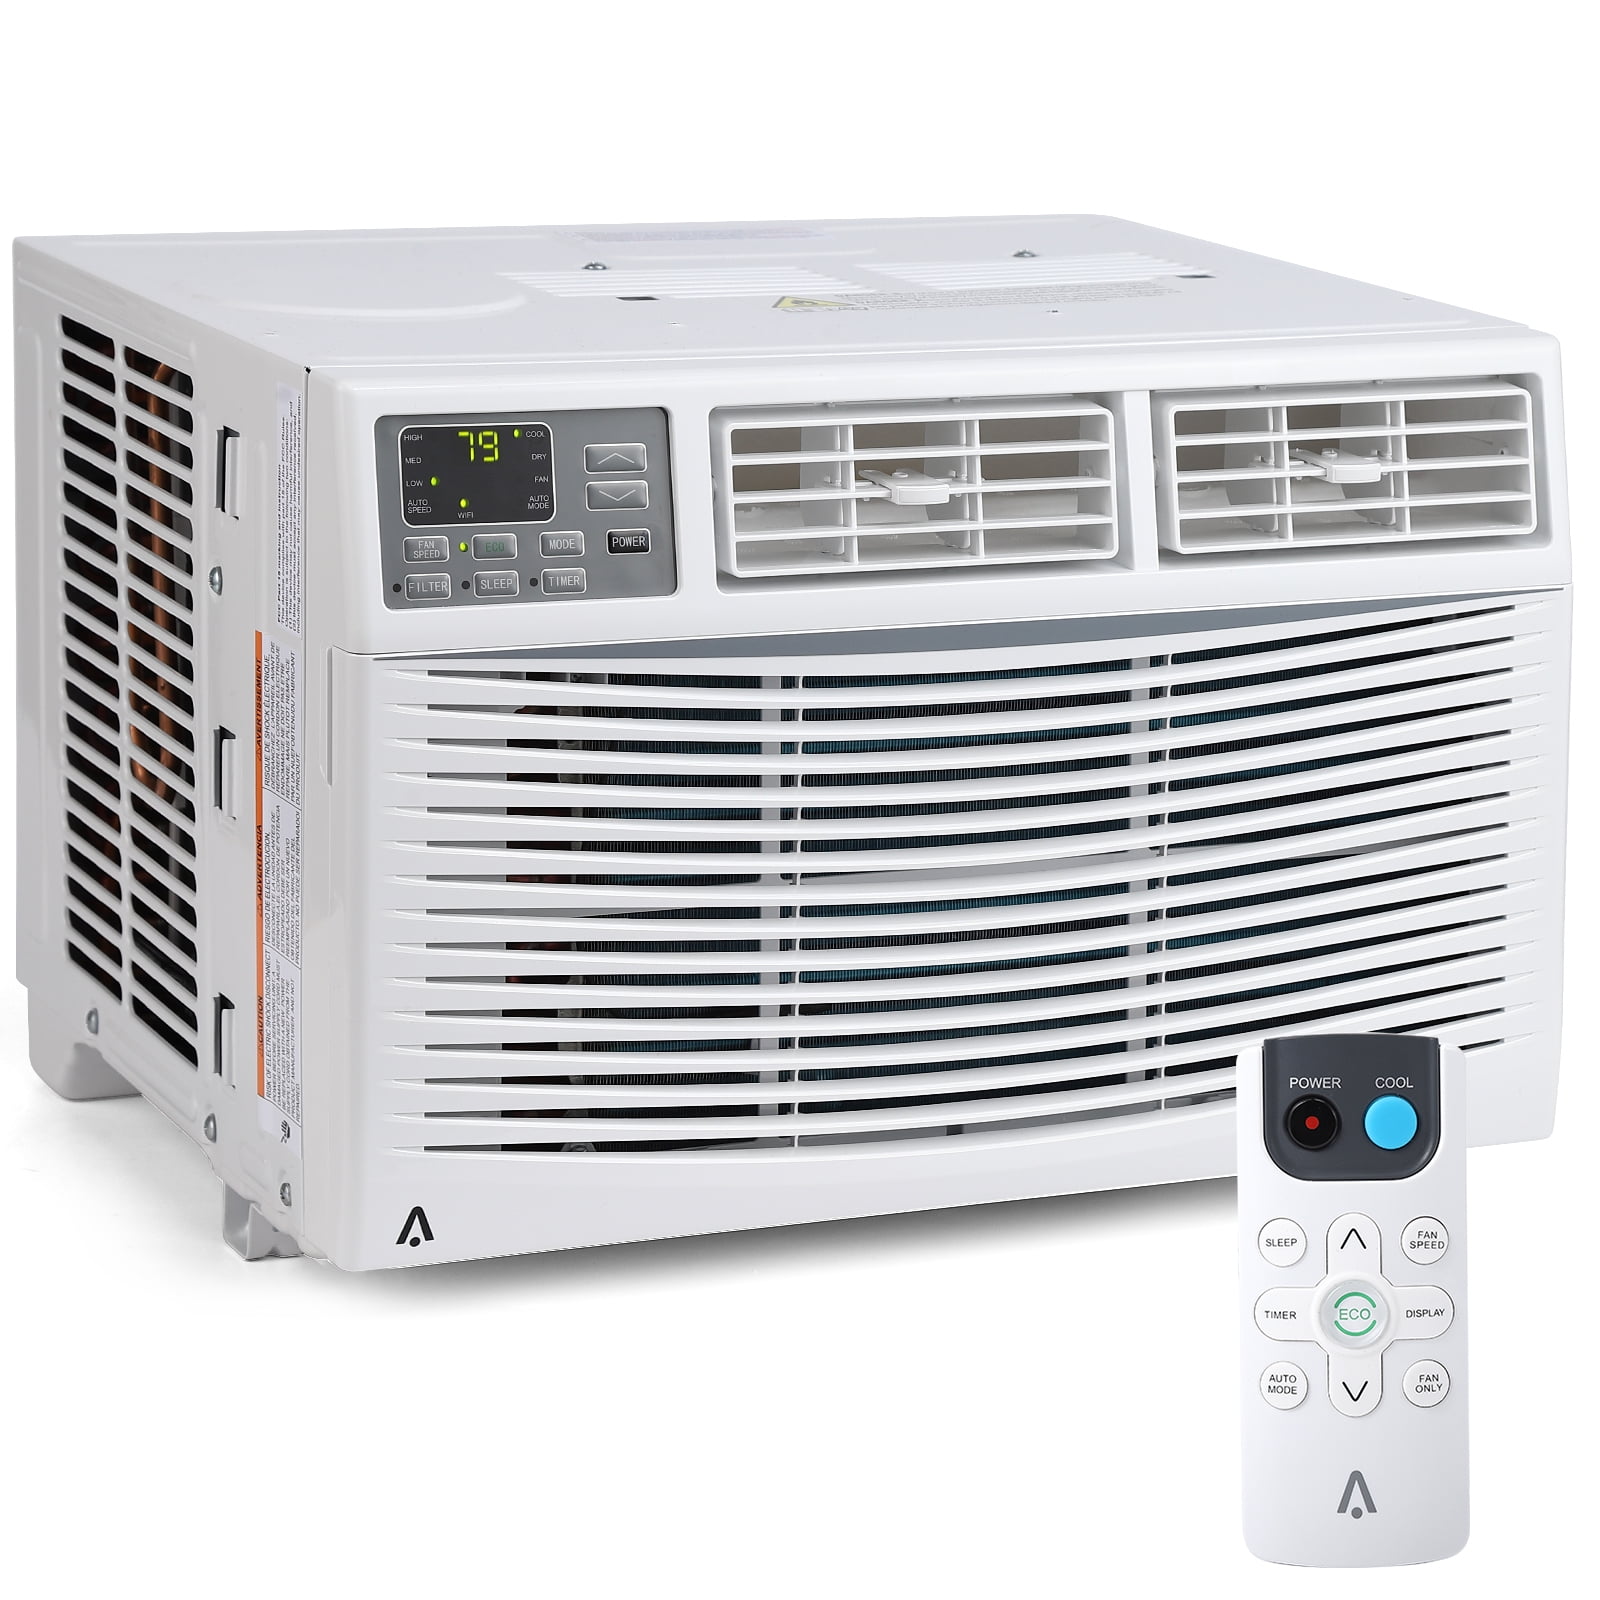 BEKAY 8000 BTU Air Conditioner Turbo Fast Cooling AC Unit with Remote/App Flexible Window Opening, Auto-Restart, 3 Cooling & Fan Speeds